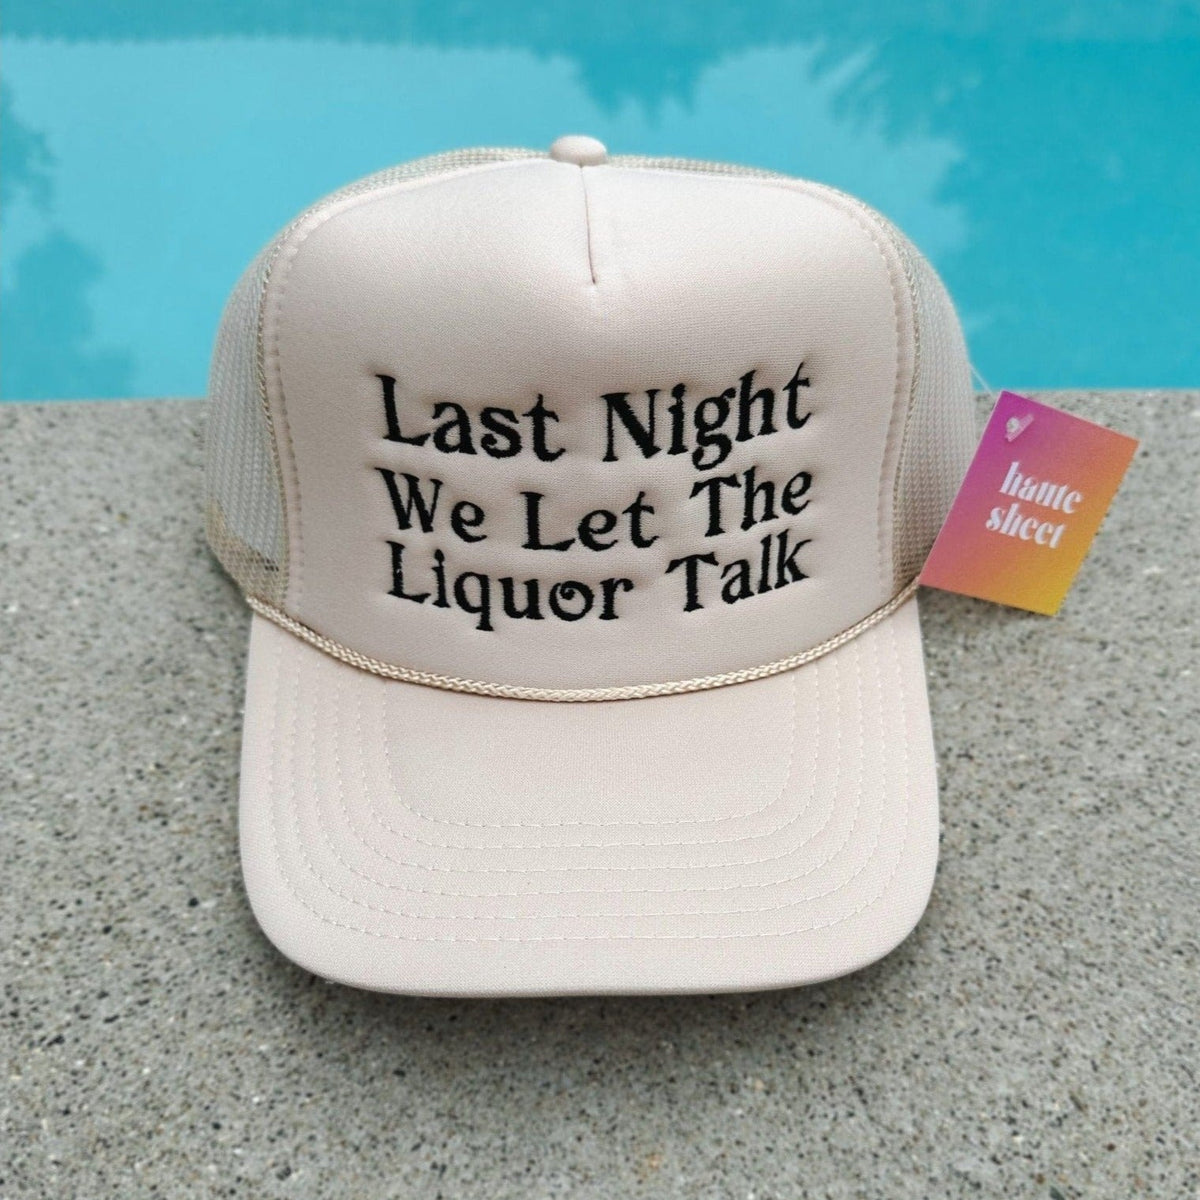 Last Night | Neutral Colored Trucker Hat by Haute Sheet Hats TheFringeCultureCollective